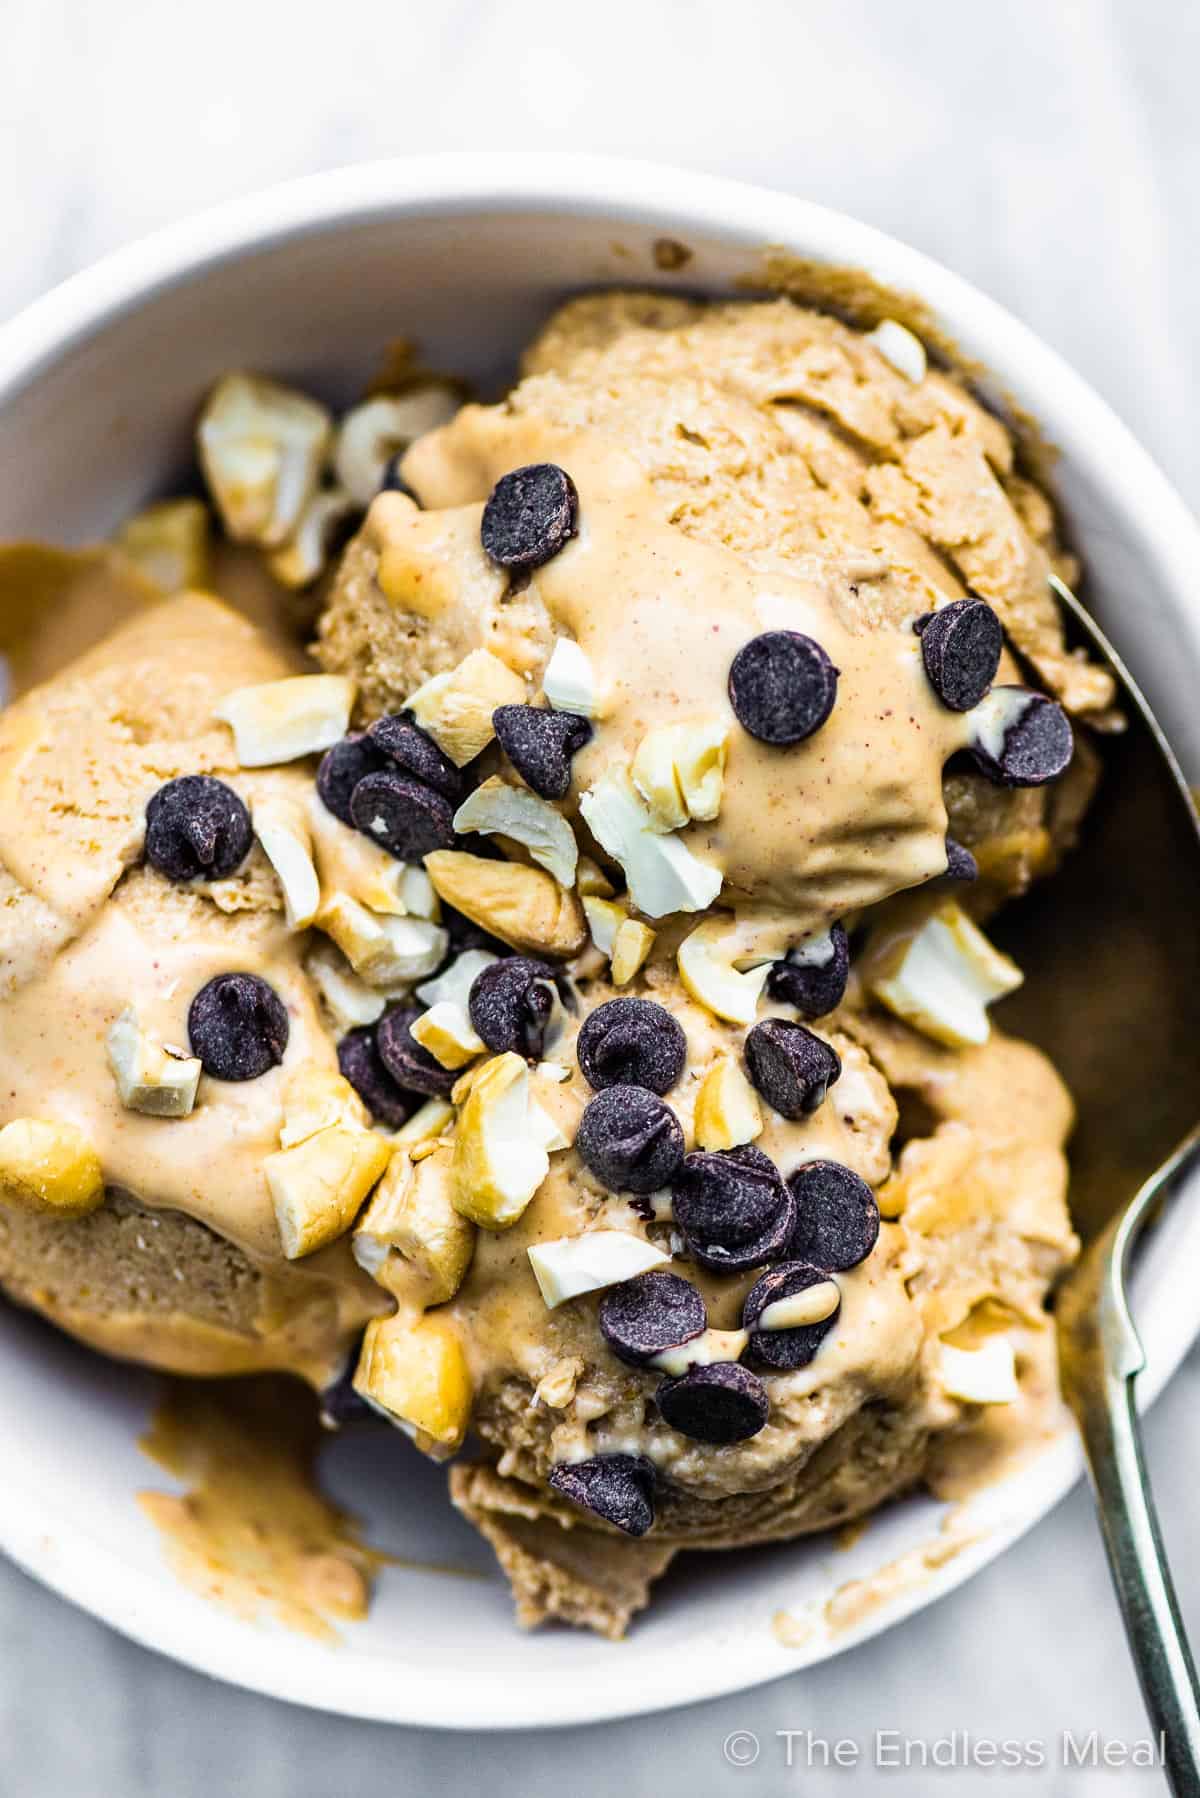 A spoon taking a scoop of banana peanut butter ice cream.